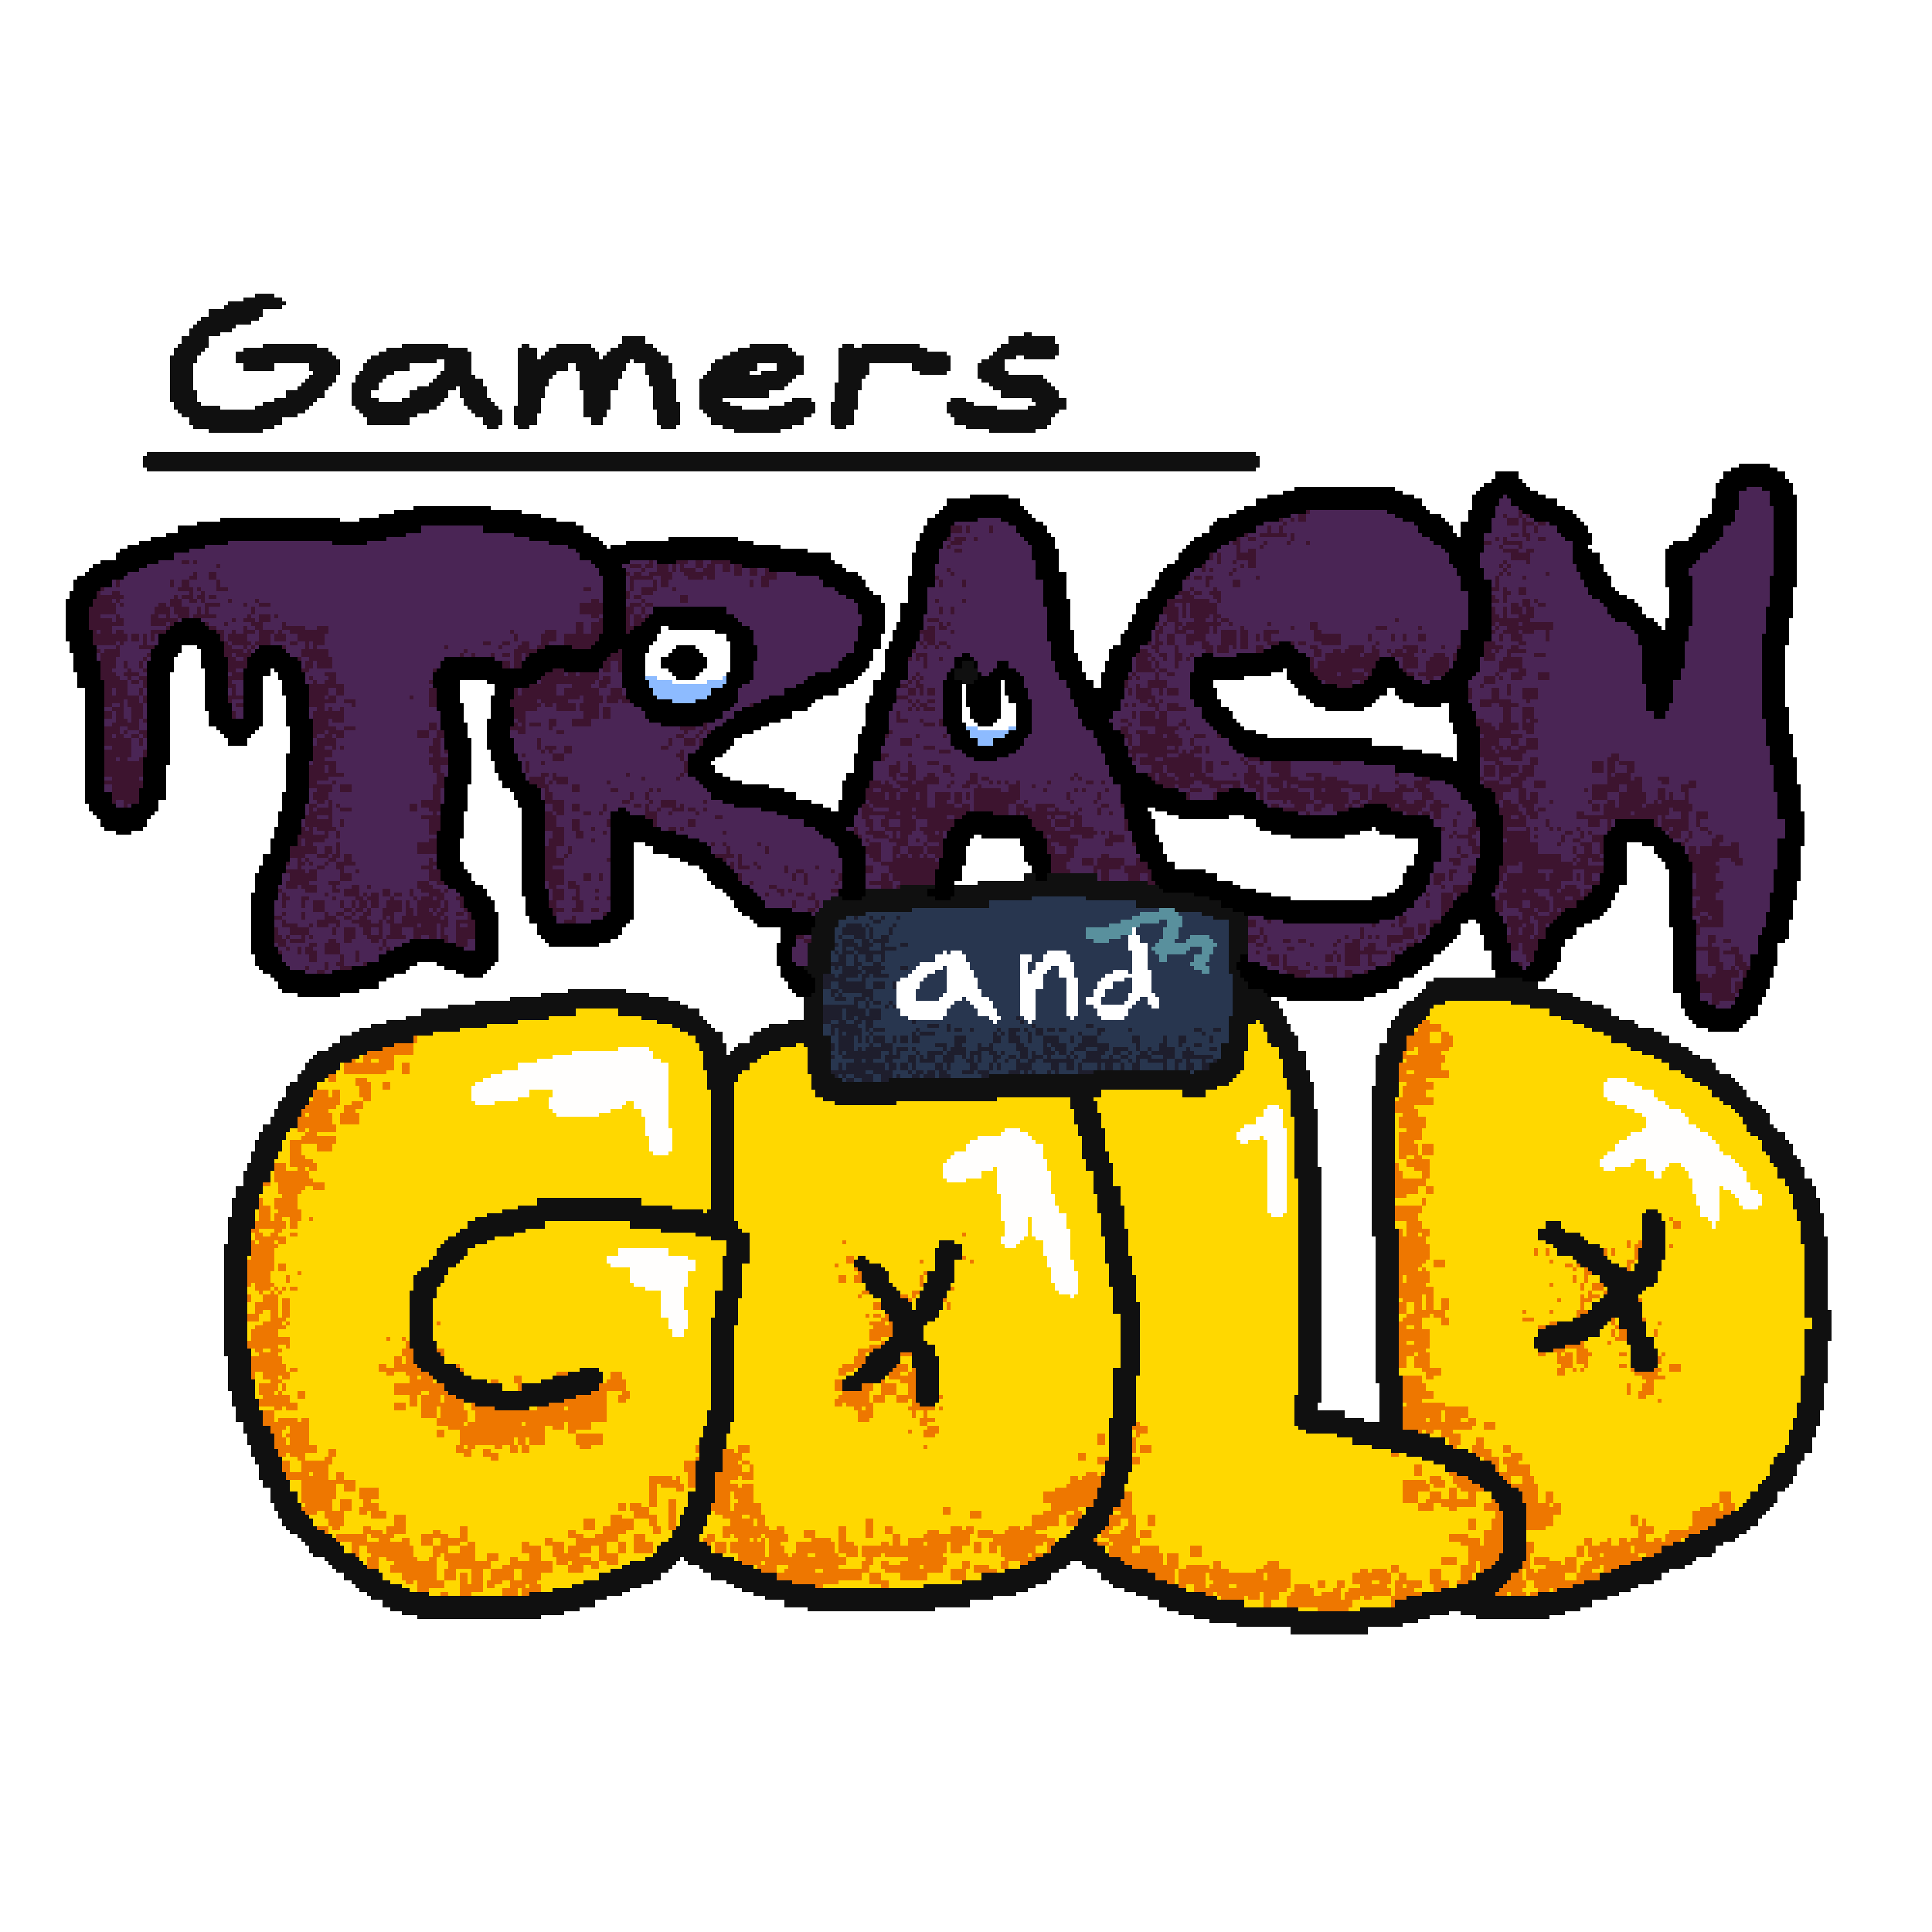 Gamers Trash and Gold